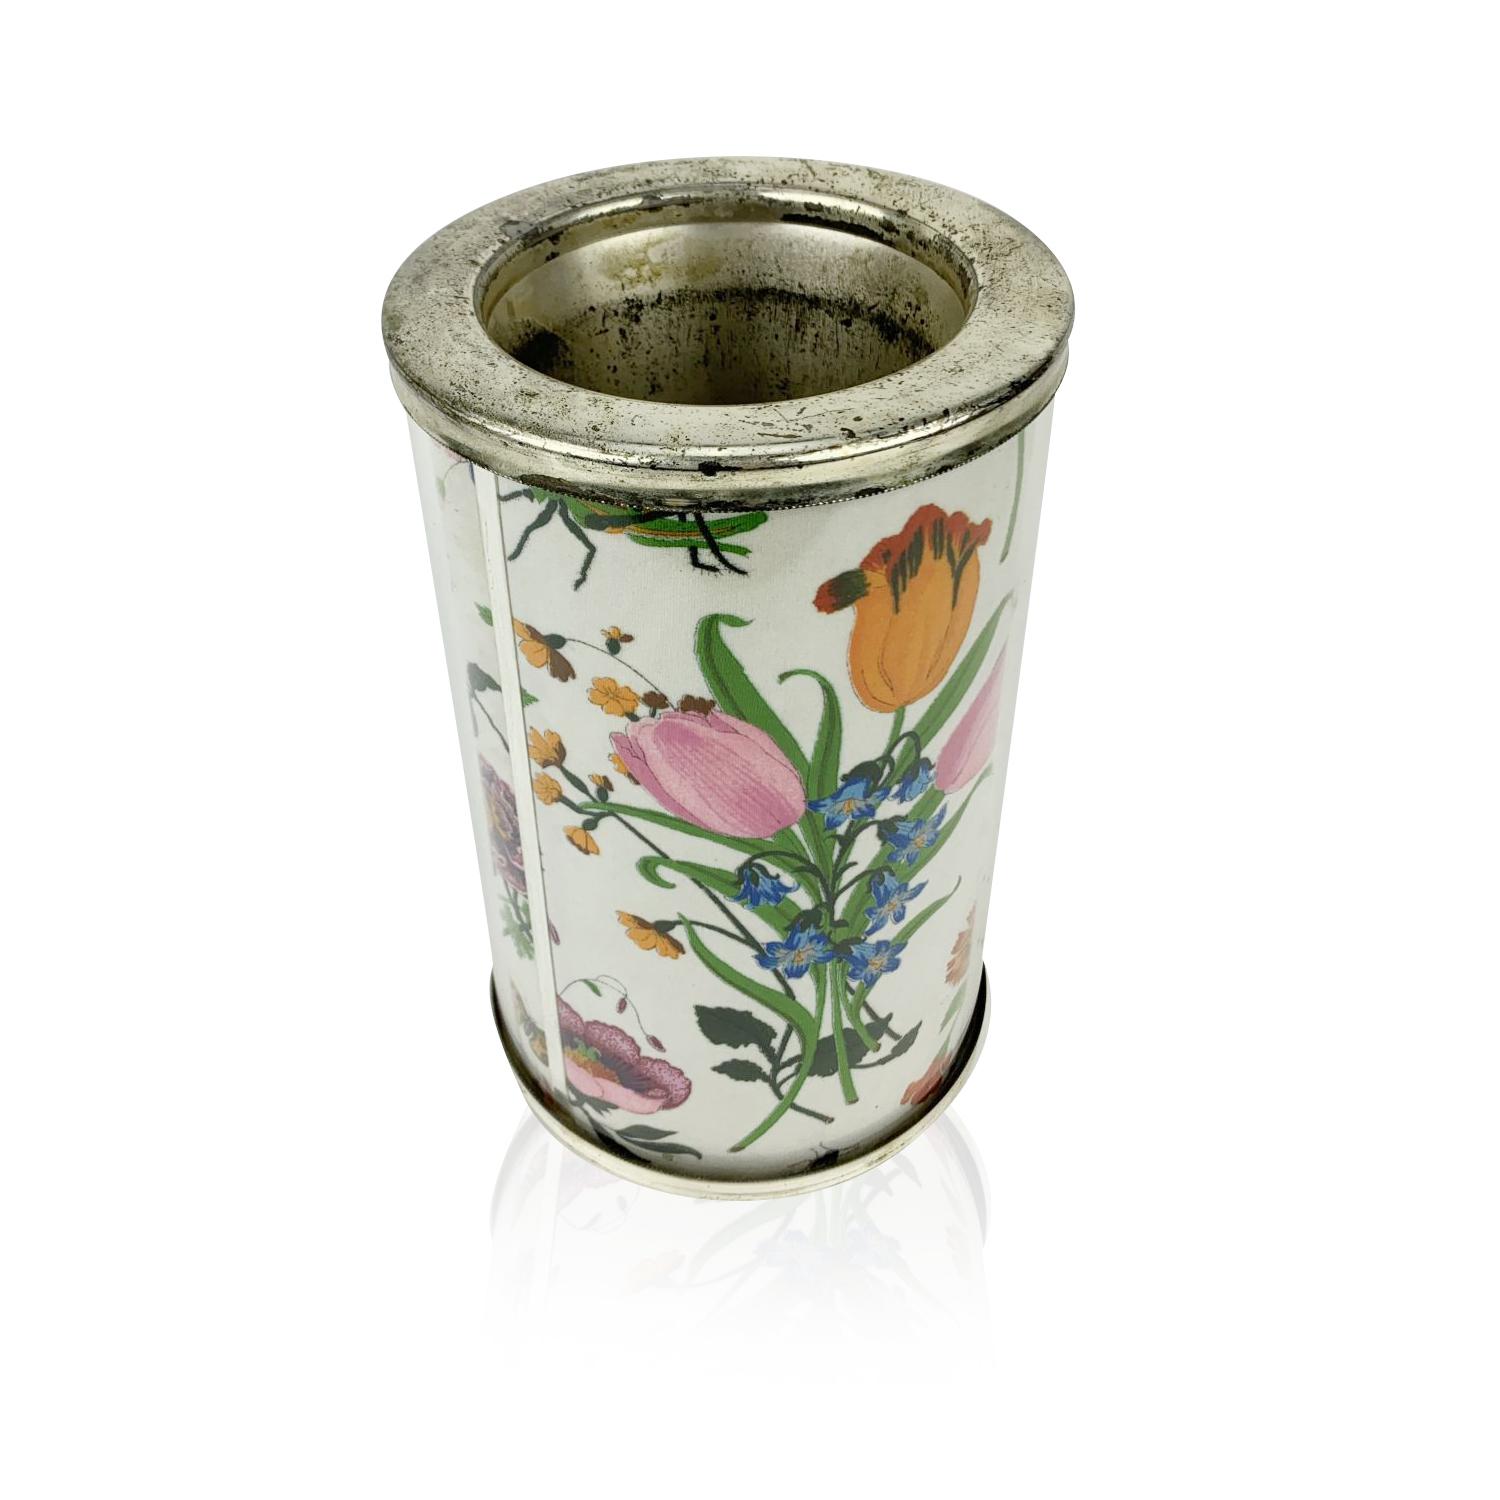 Rare Gucci wine cooler/bottle holder. Made of silver metal and plastic with iconic Flora fabric interposed between the two layers. Marked 'Gucci - Made in Italy' on the bottom. Height: 8. 5 inches - 21,5 cm - Width:6.5 inches - 16,5